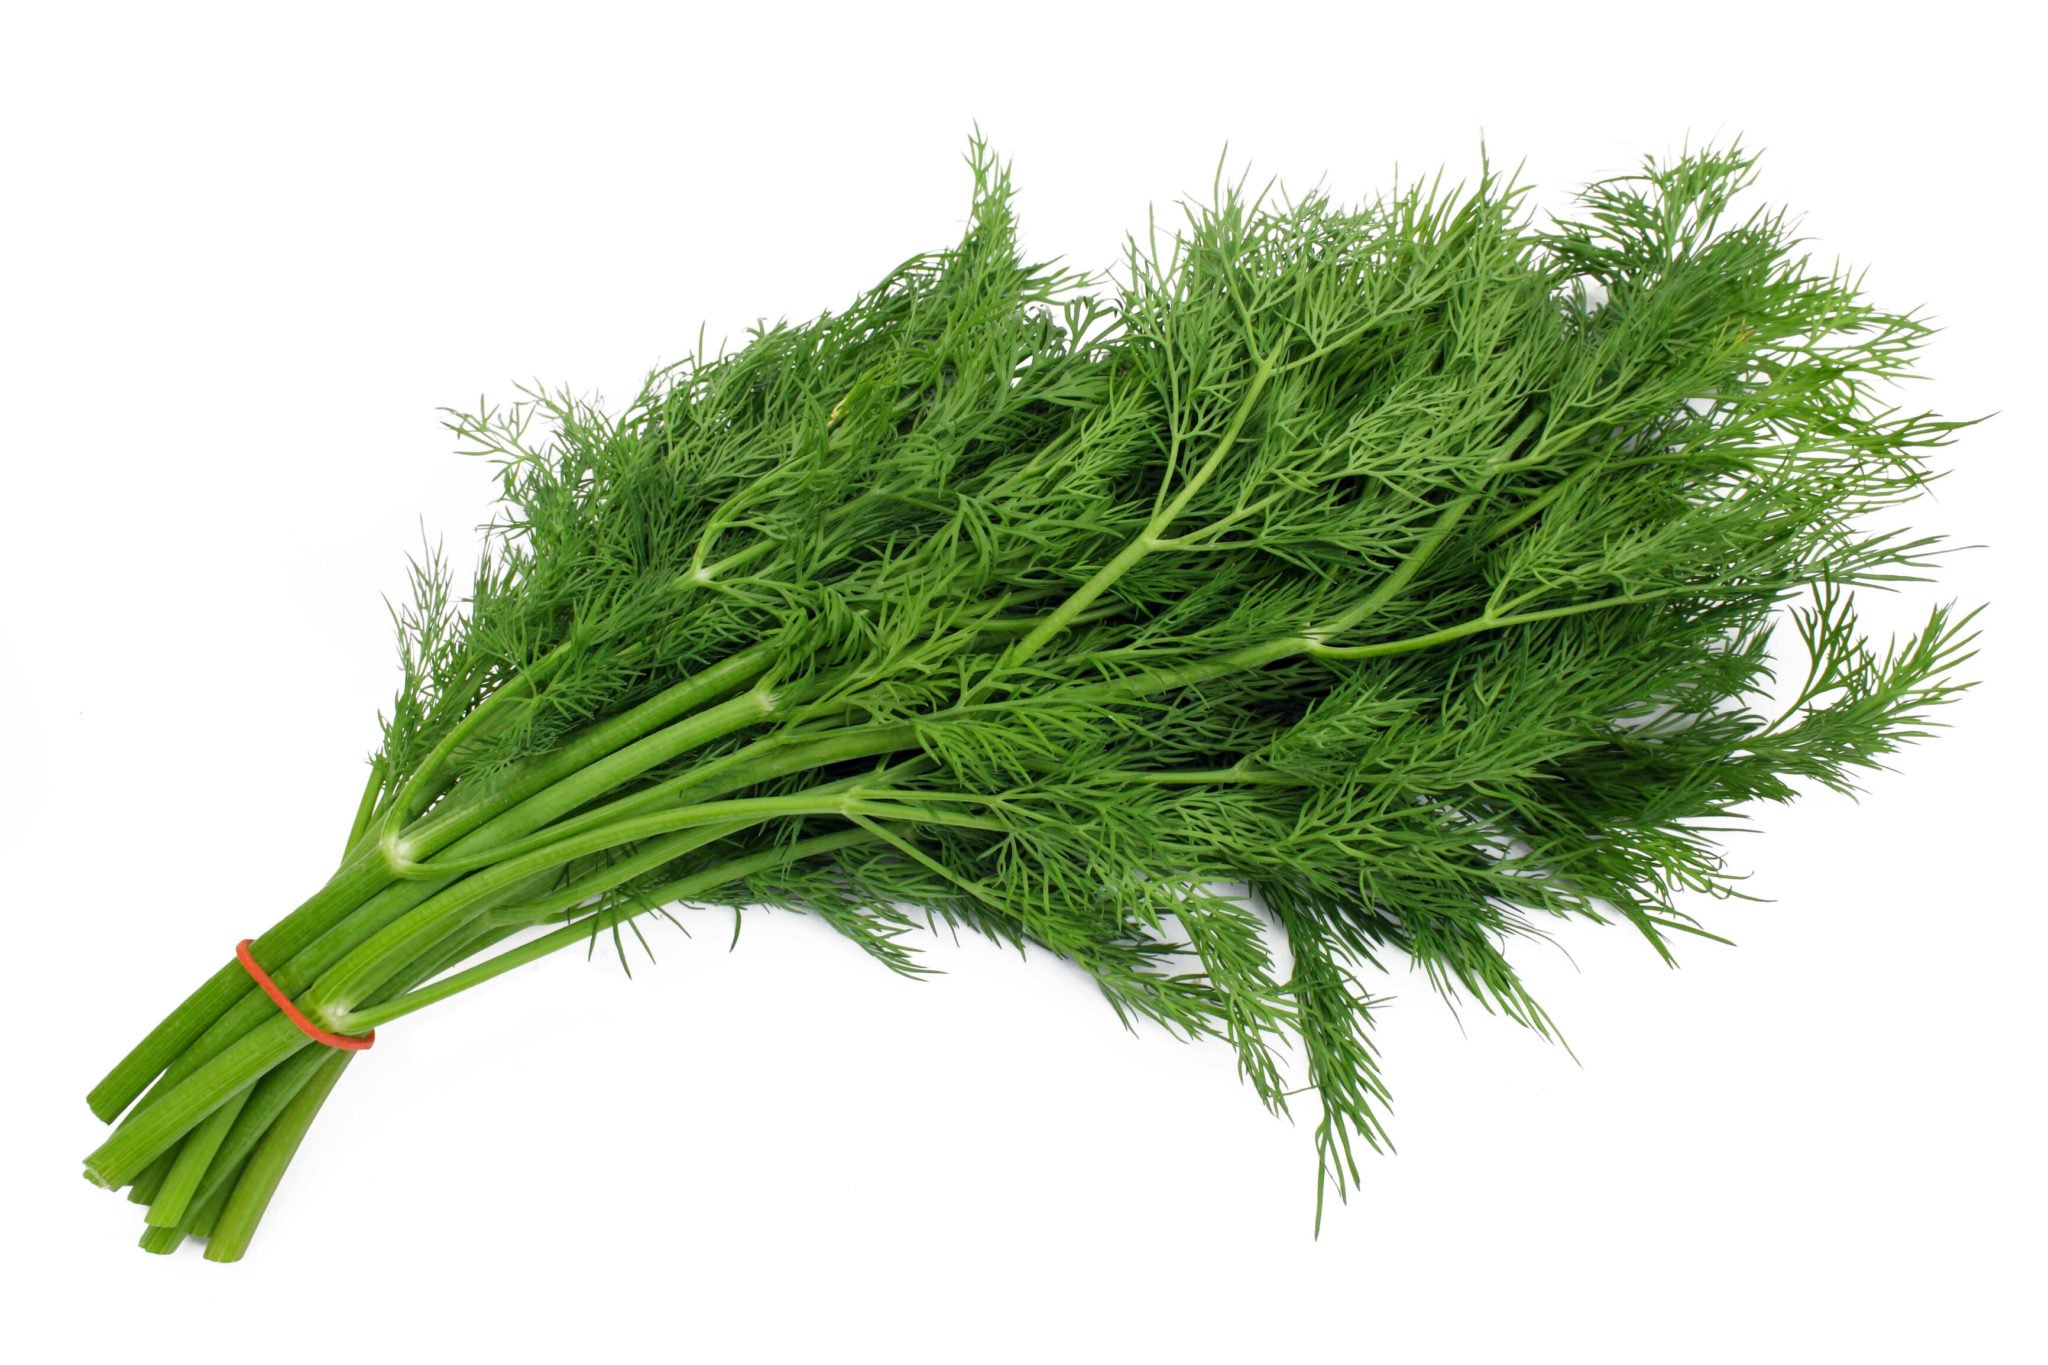 Cooking with Fresh Herbs: Tips for using dill 